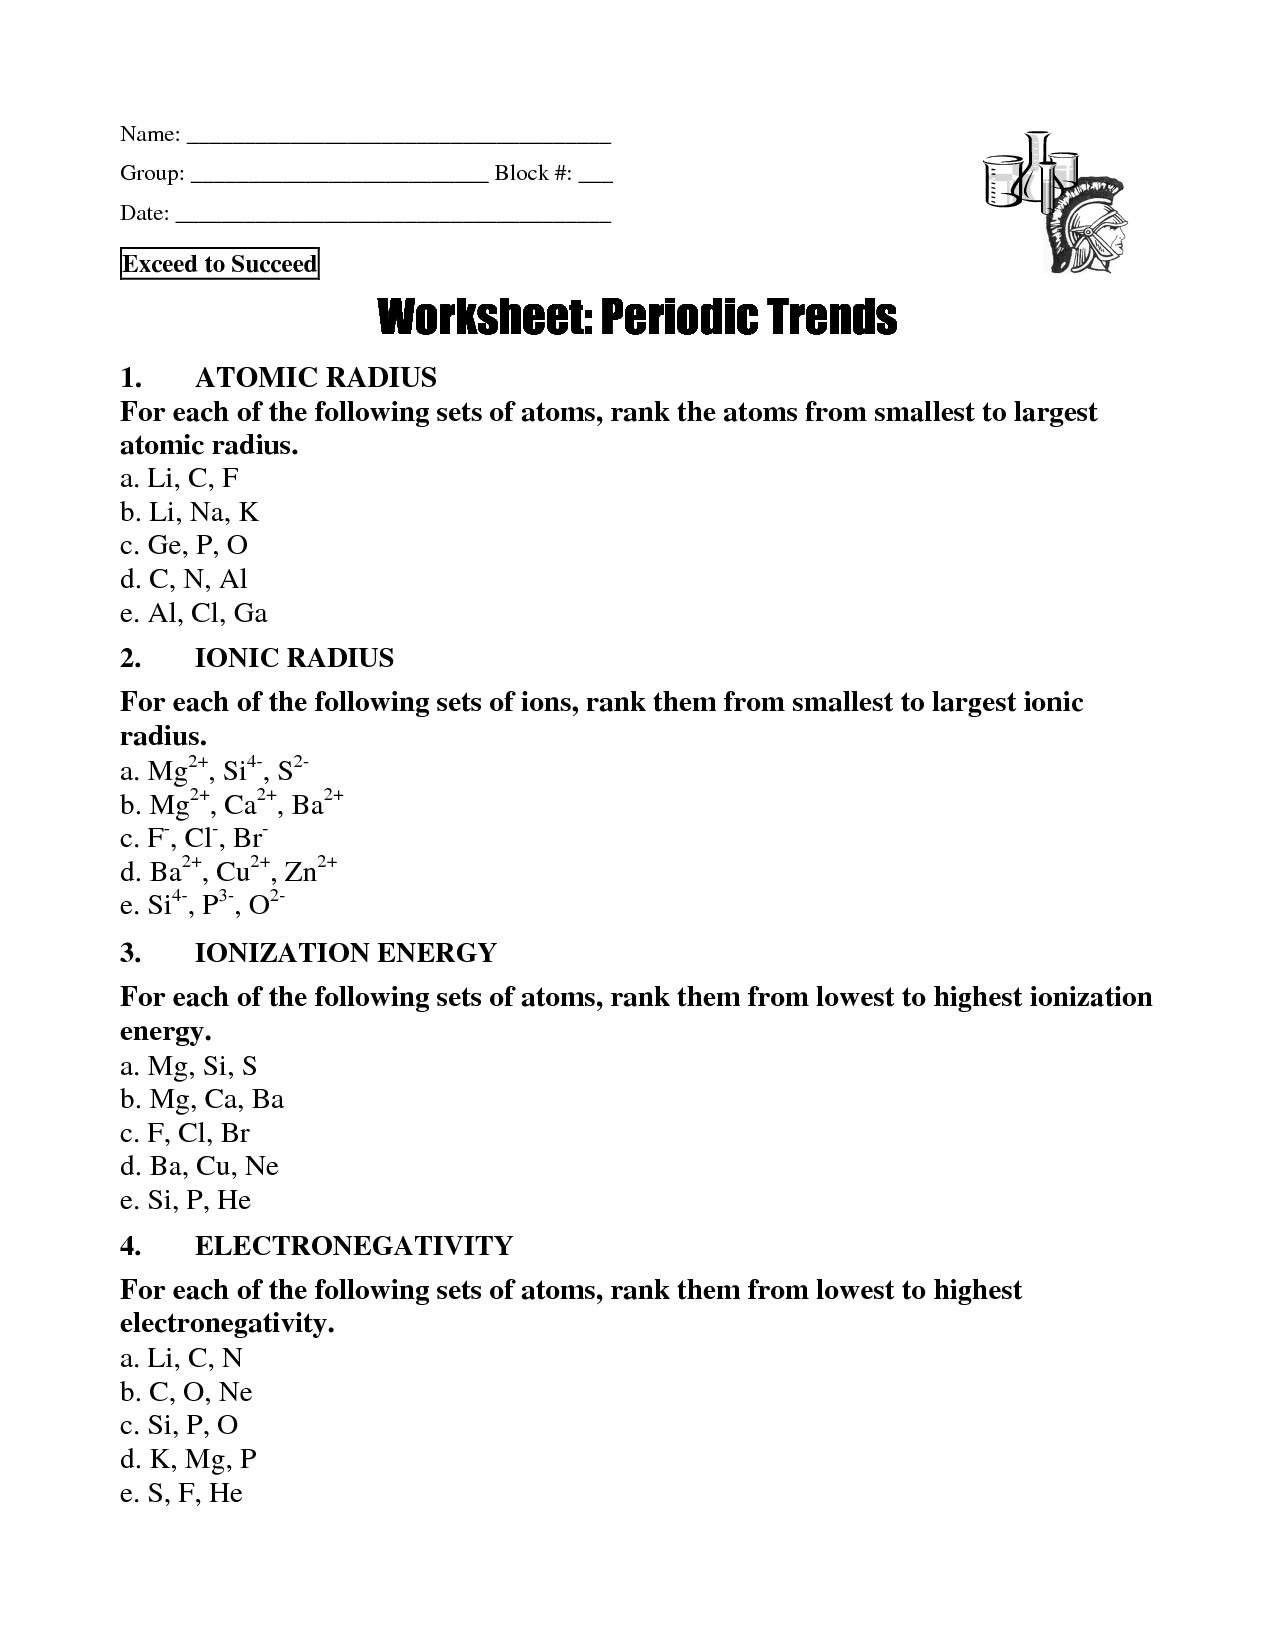 Periodic Trends Worksheet Answer Key Periodic Table Mars Worksheet